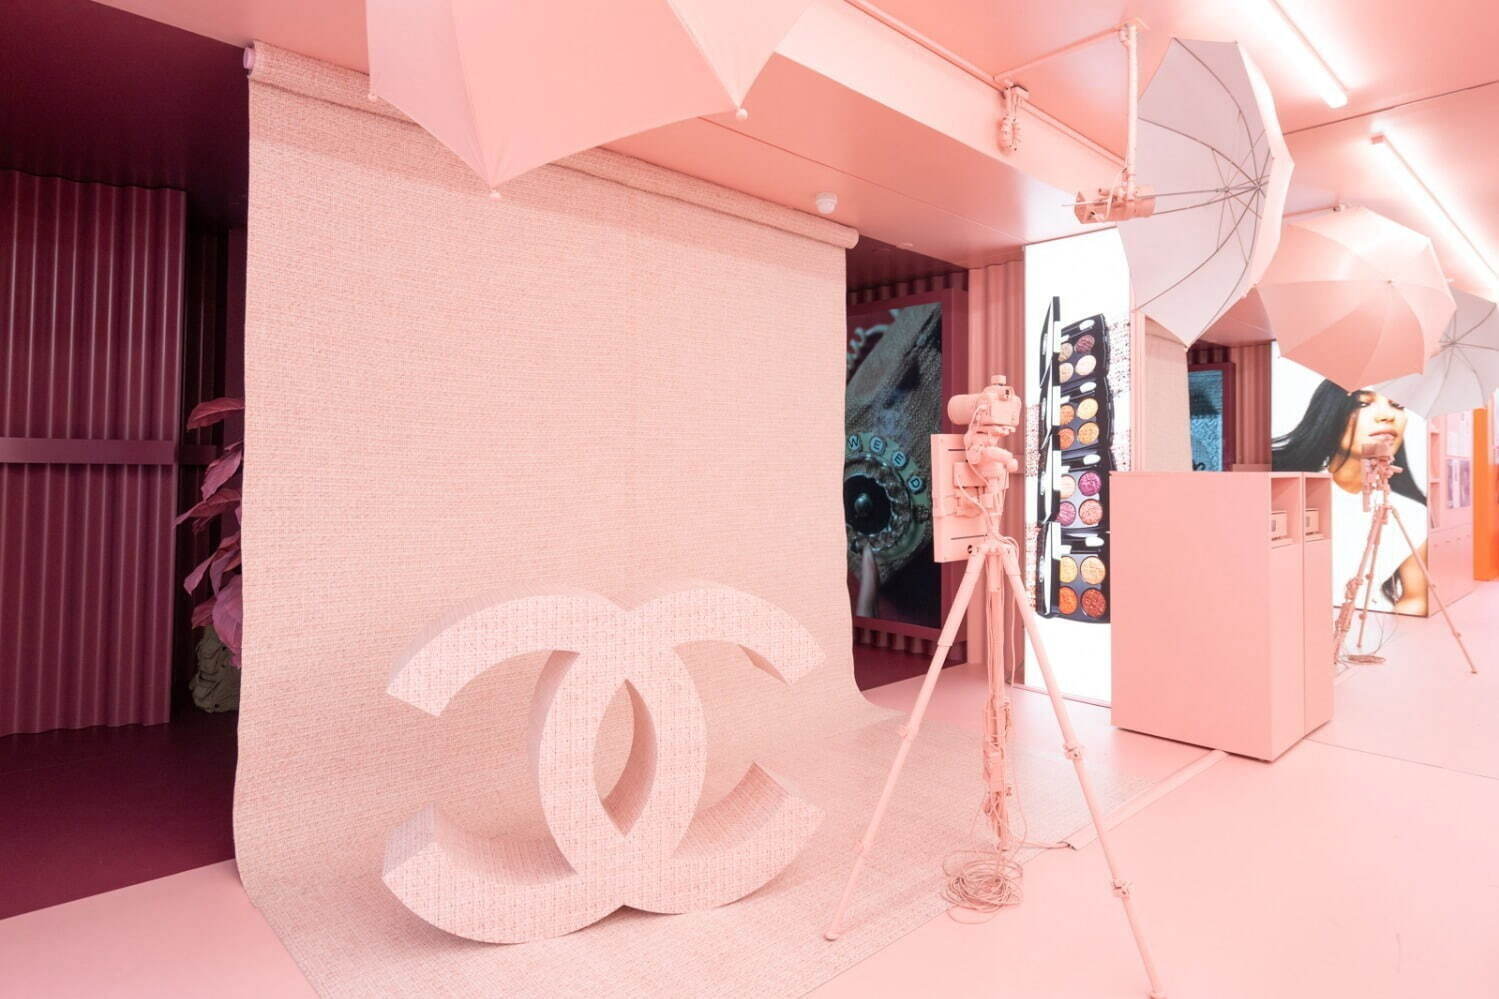 Chanel unveils newly revamped NYC flagship store